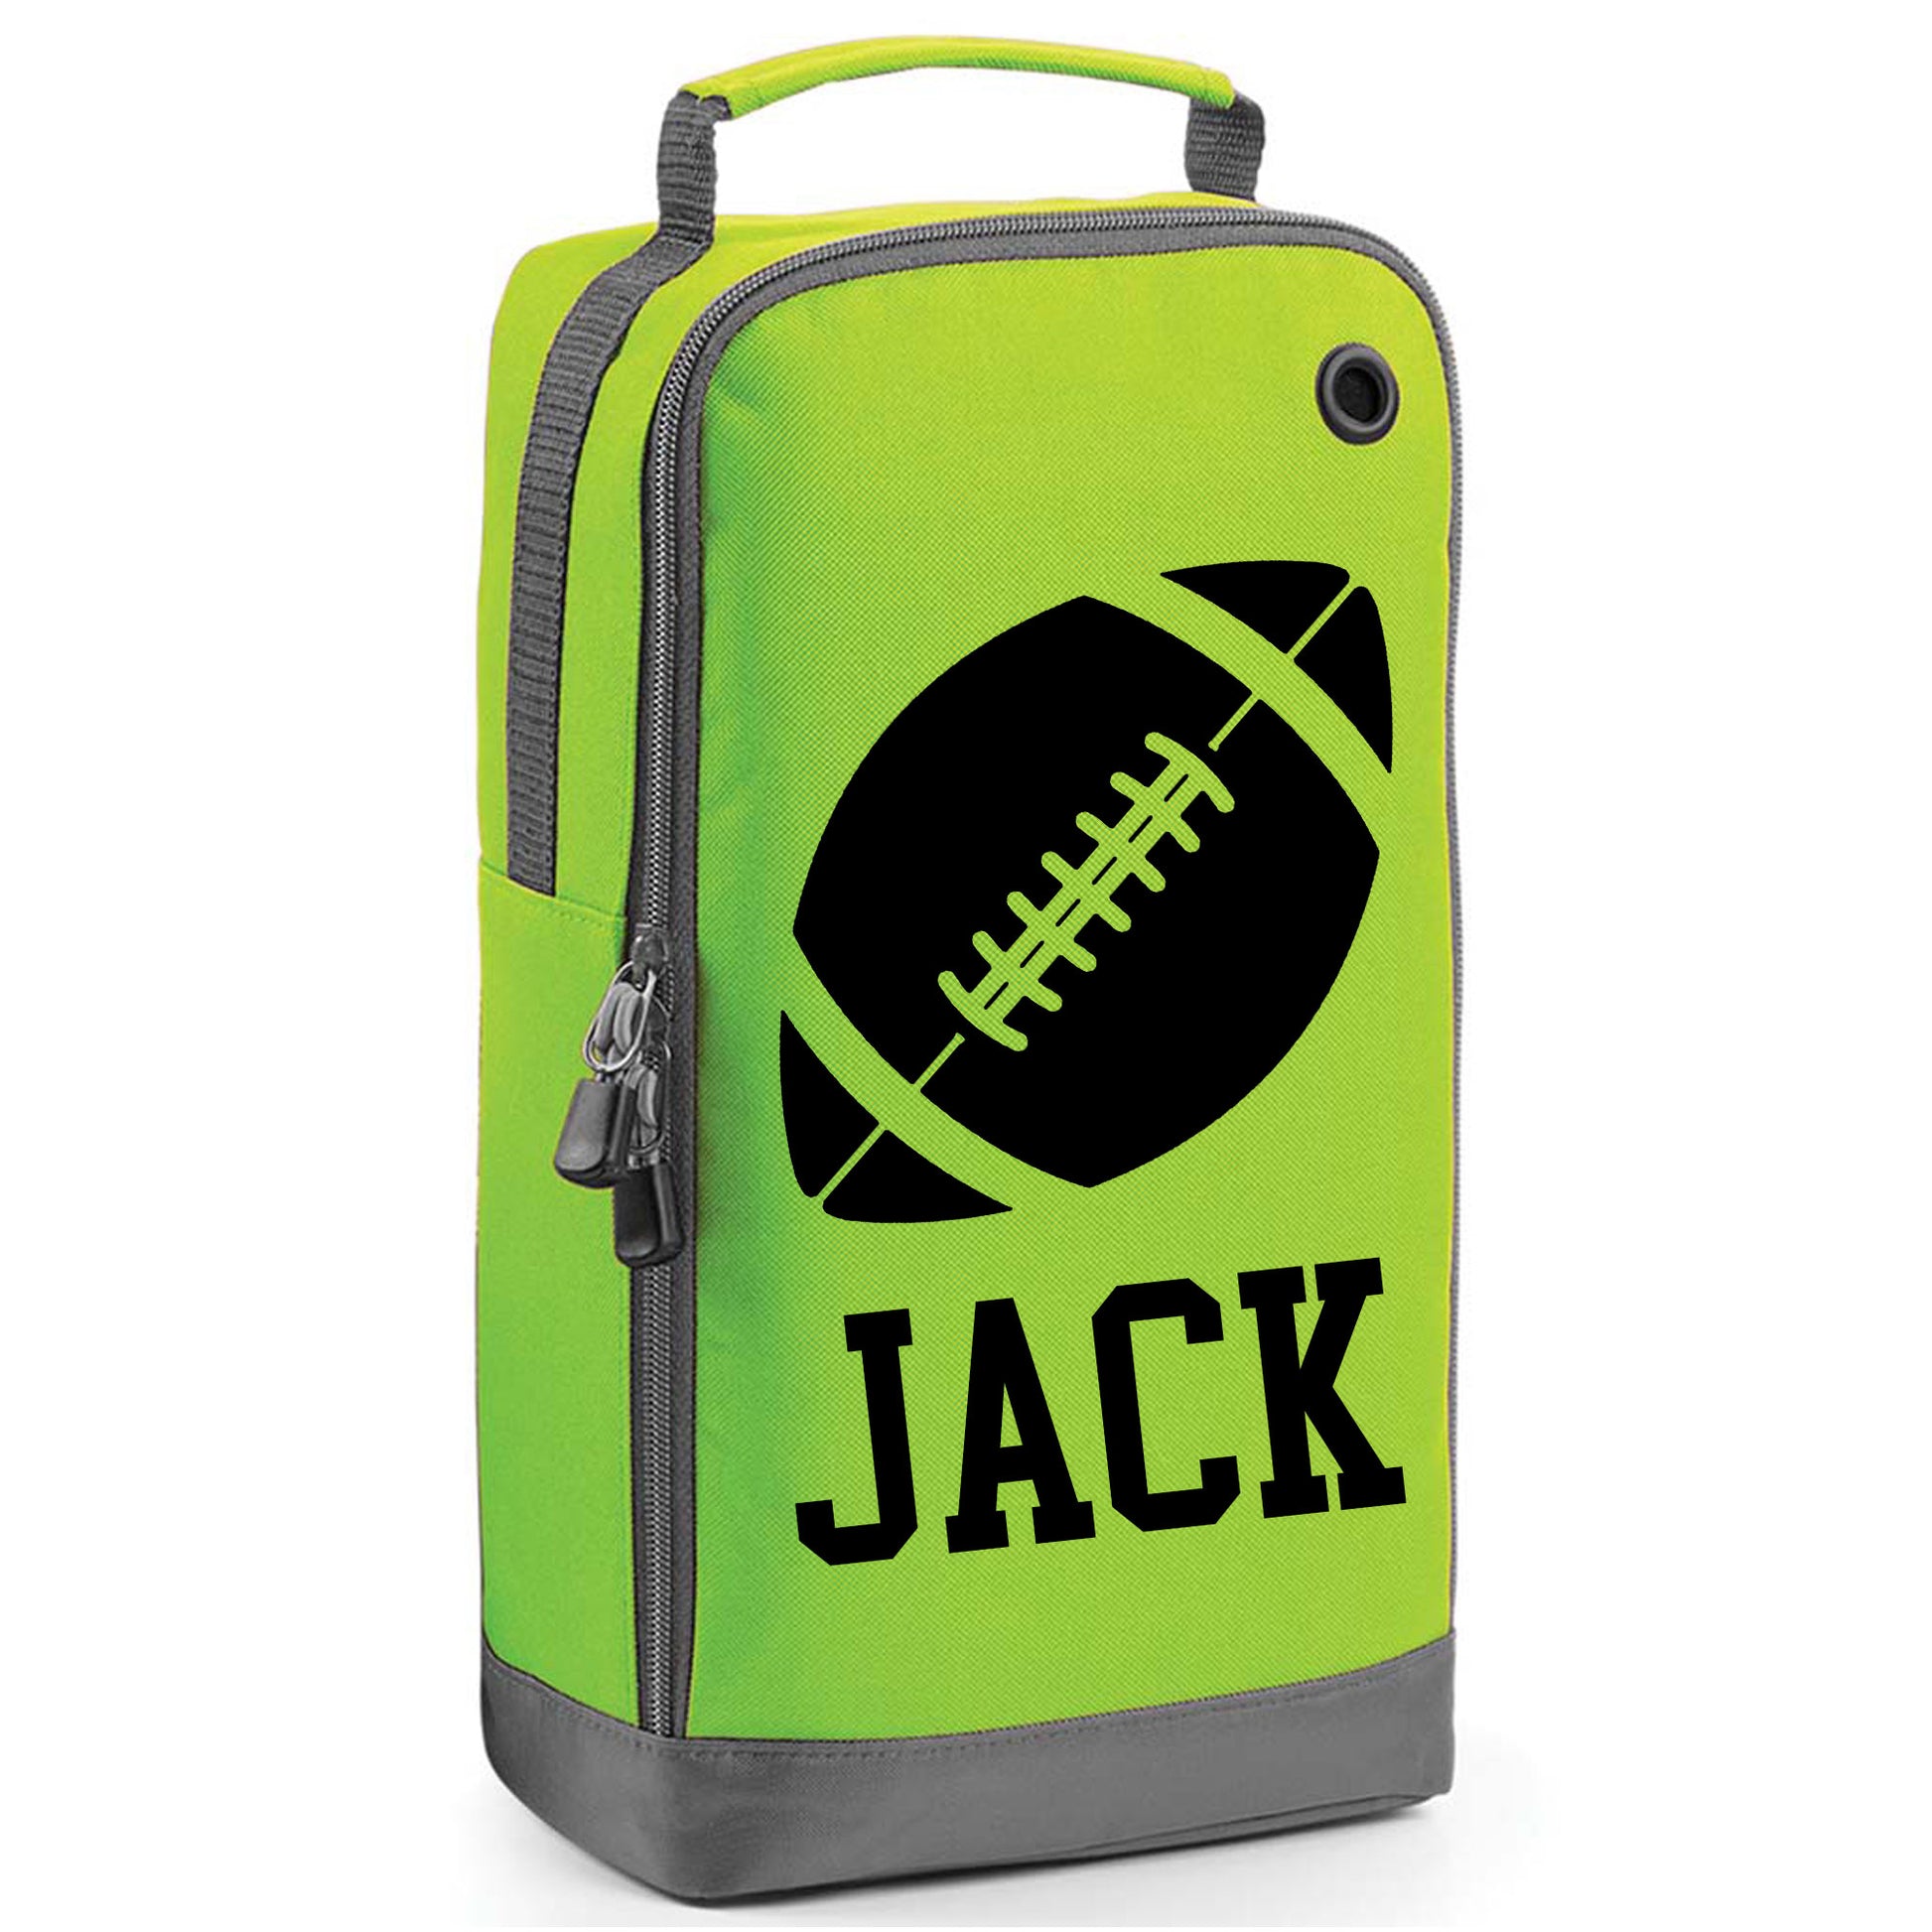 Personalised Rugby/ American Football Boot Bag with Design & Name  - Always Looking Good - Lime Green  